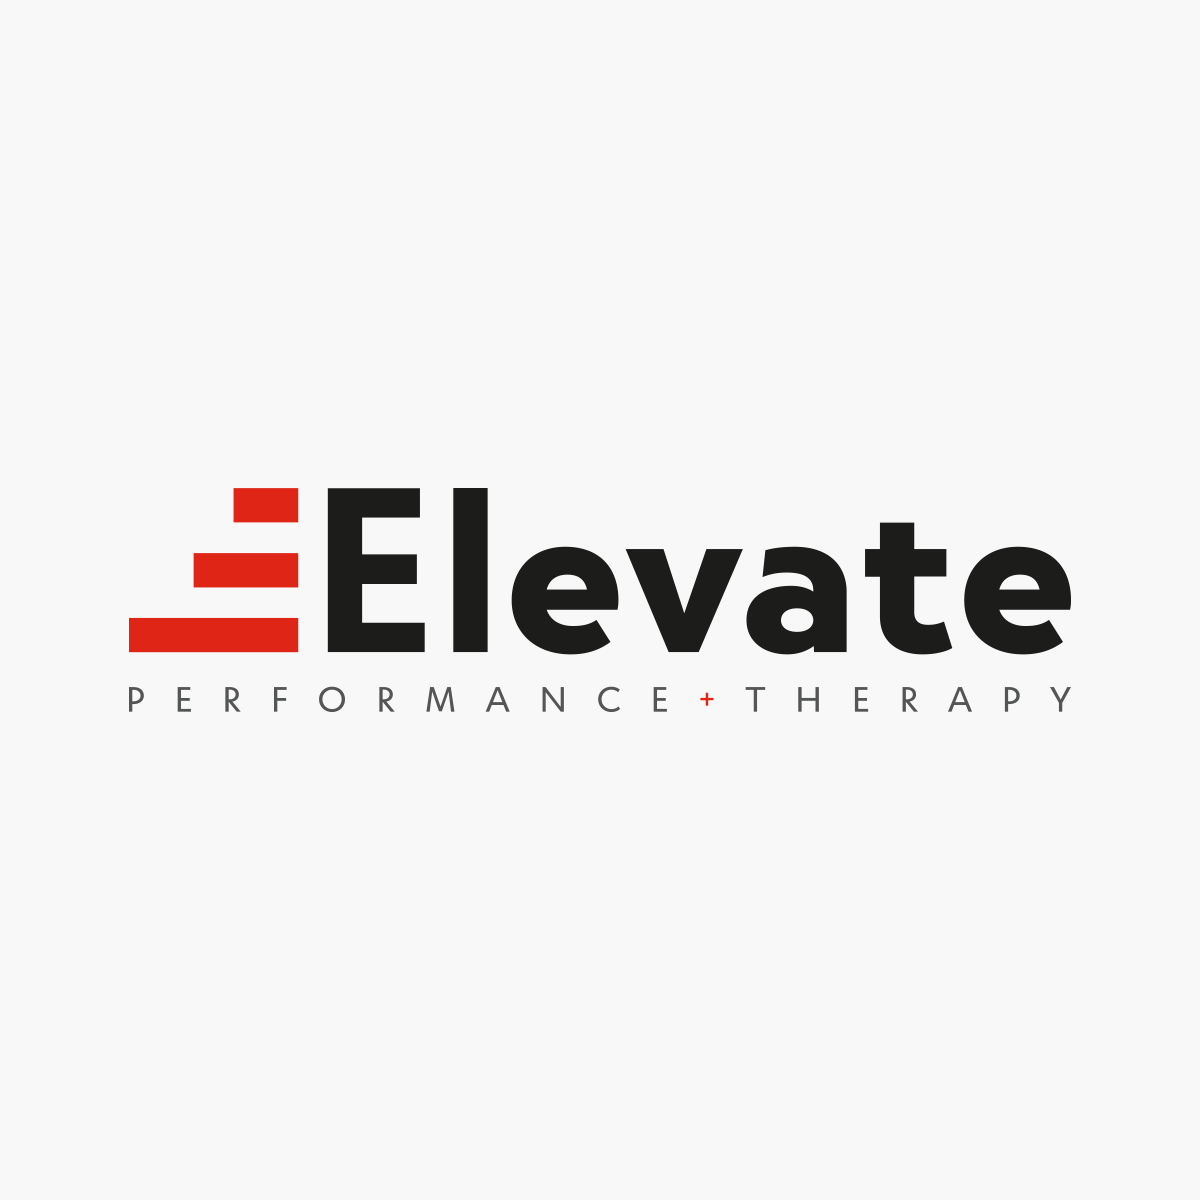 Logo design, brand identity, graphic design and printing for Elevate Performance & Therapy in Trail BC